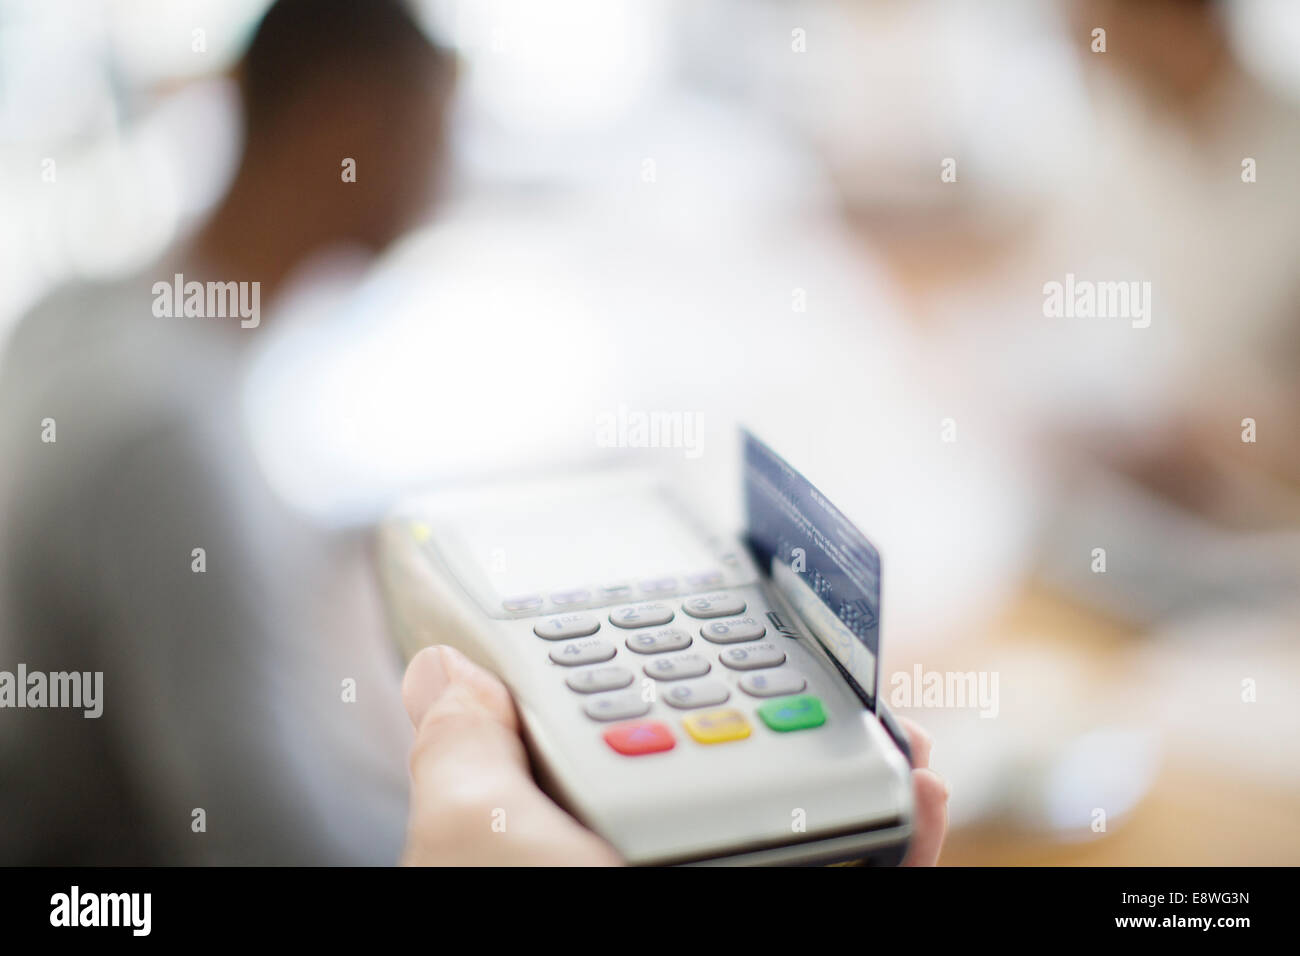 Credit card being swiped through payment machine Stock Photo